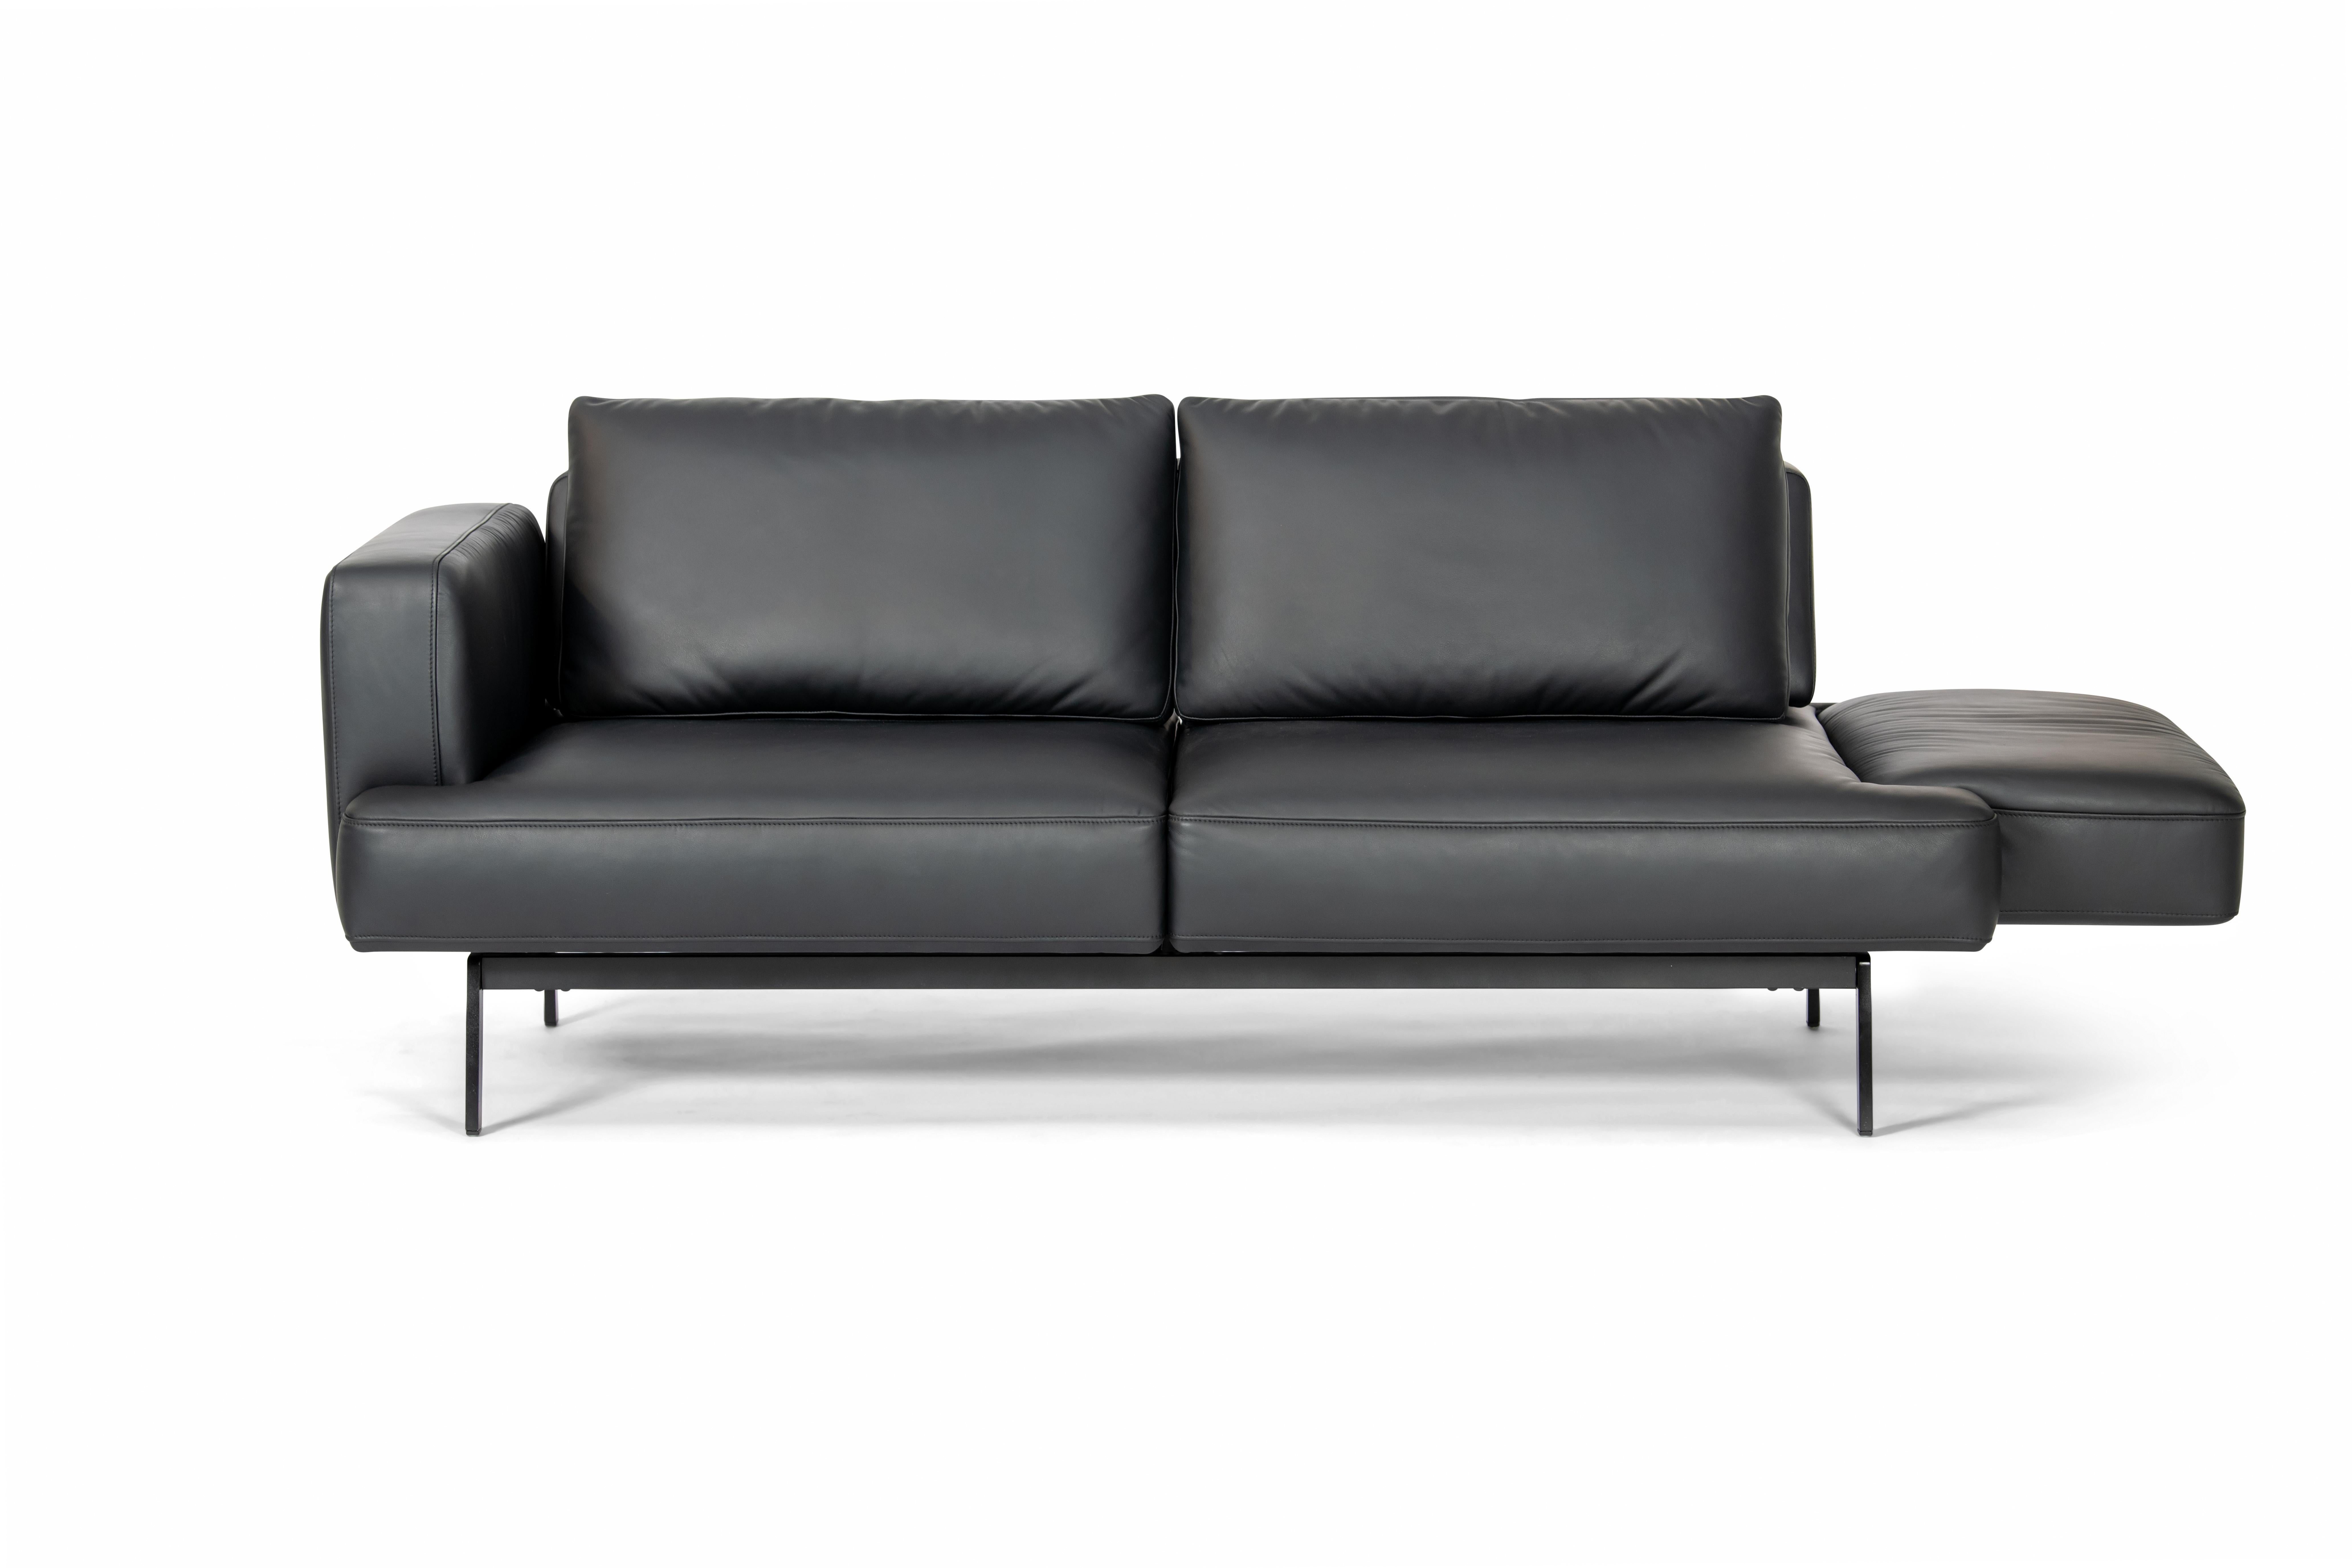 De Sede DS-747/03 Multifunctional Sofa in Black Leather Seat and Back Upholstery For Sale 3